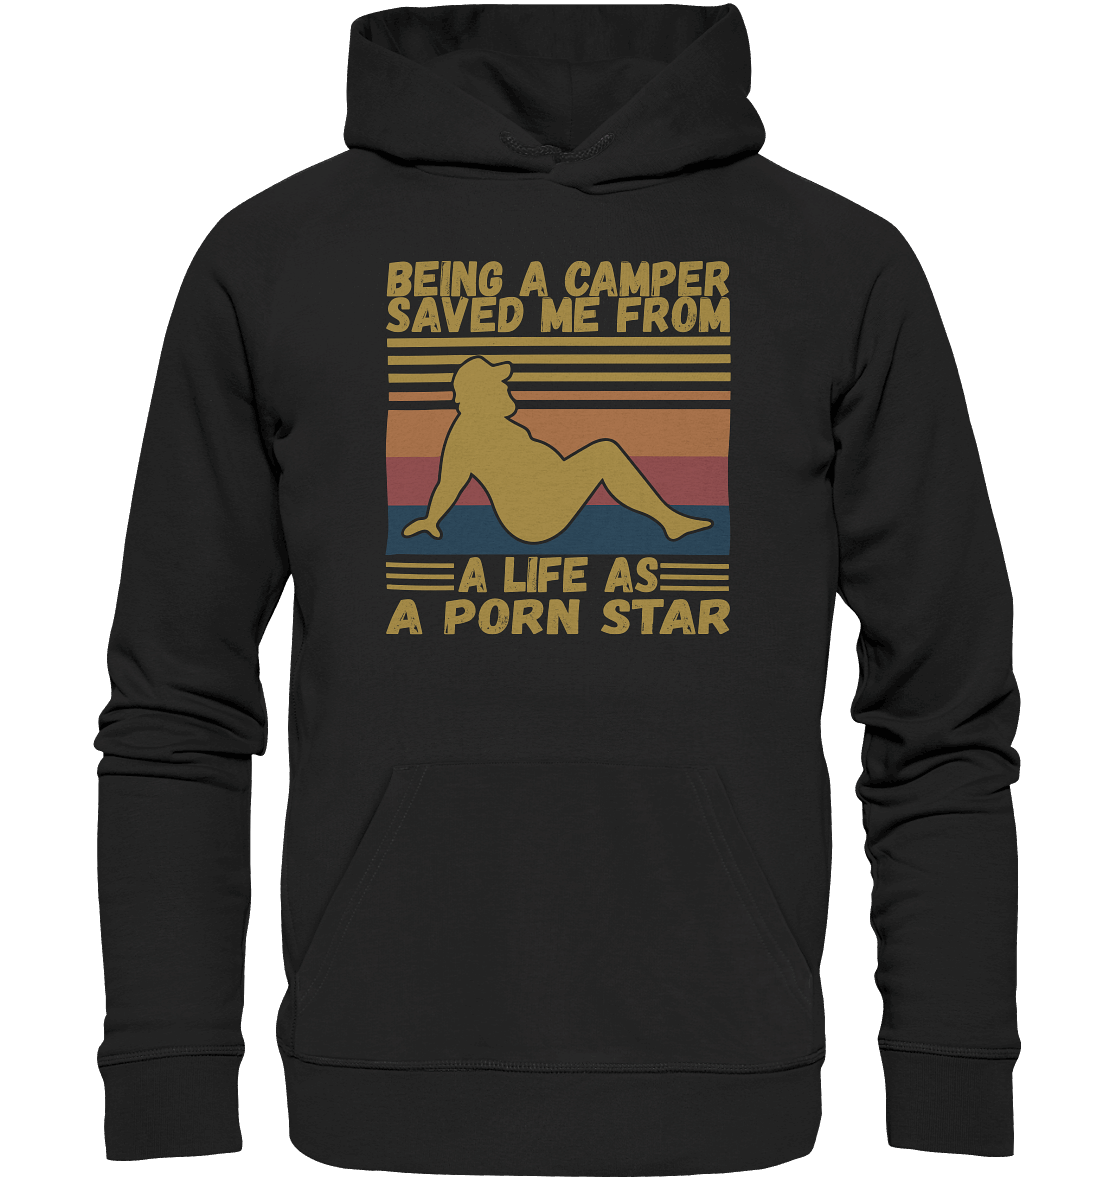 Being A Camper Saved Me From A Life As A Porn Star - Organic Basic Hoodie